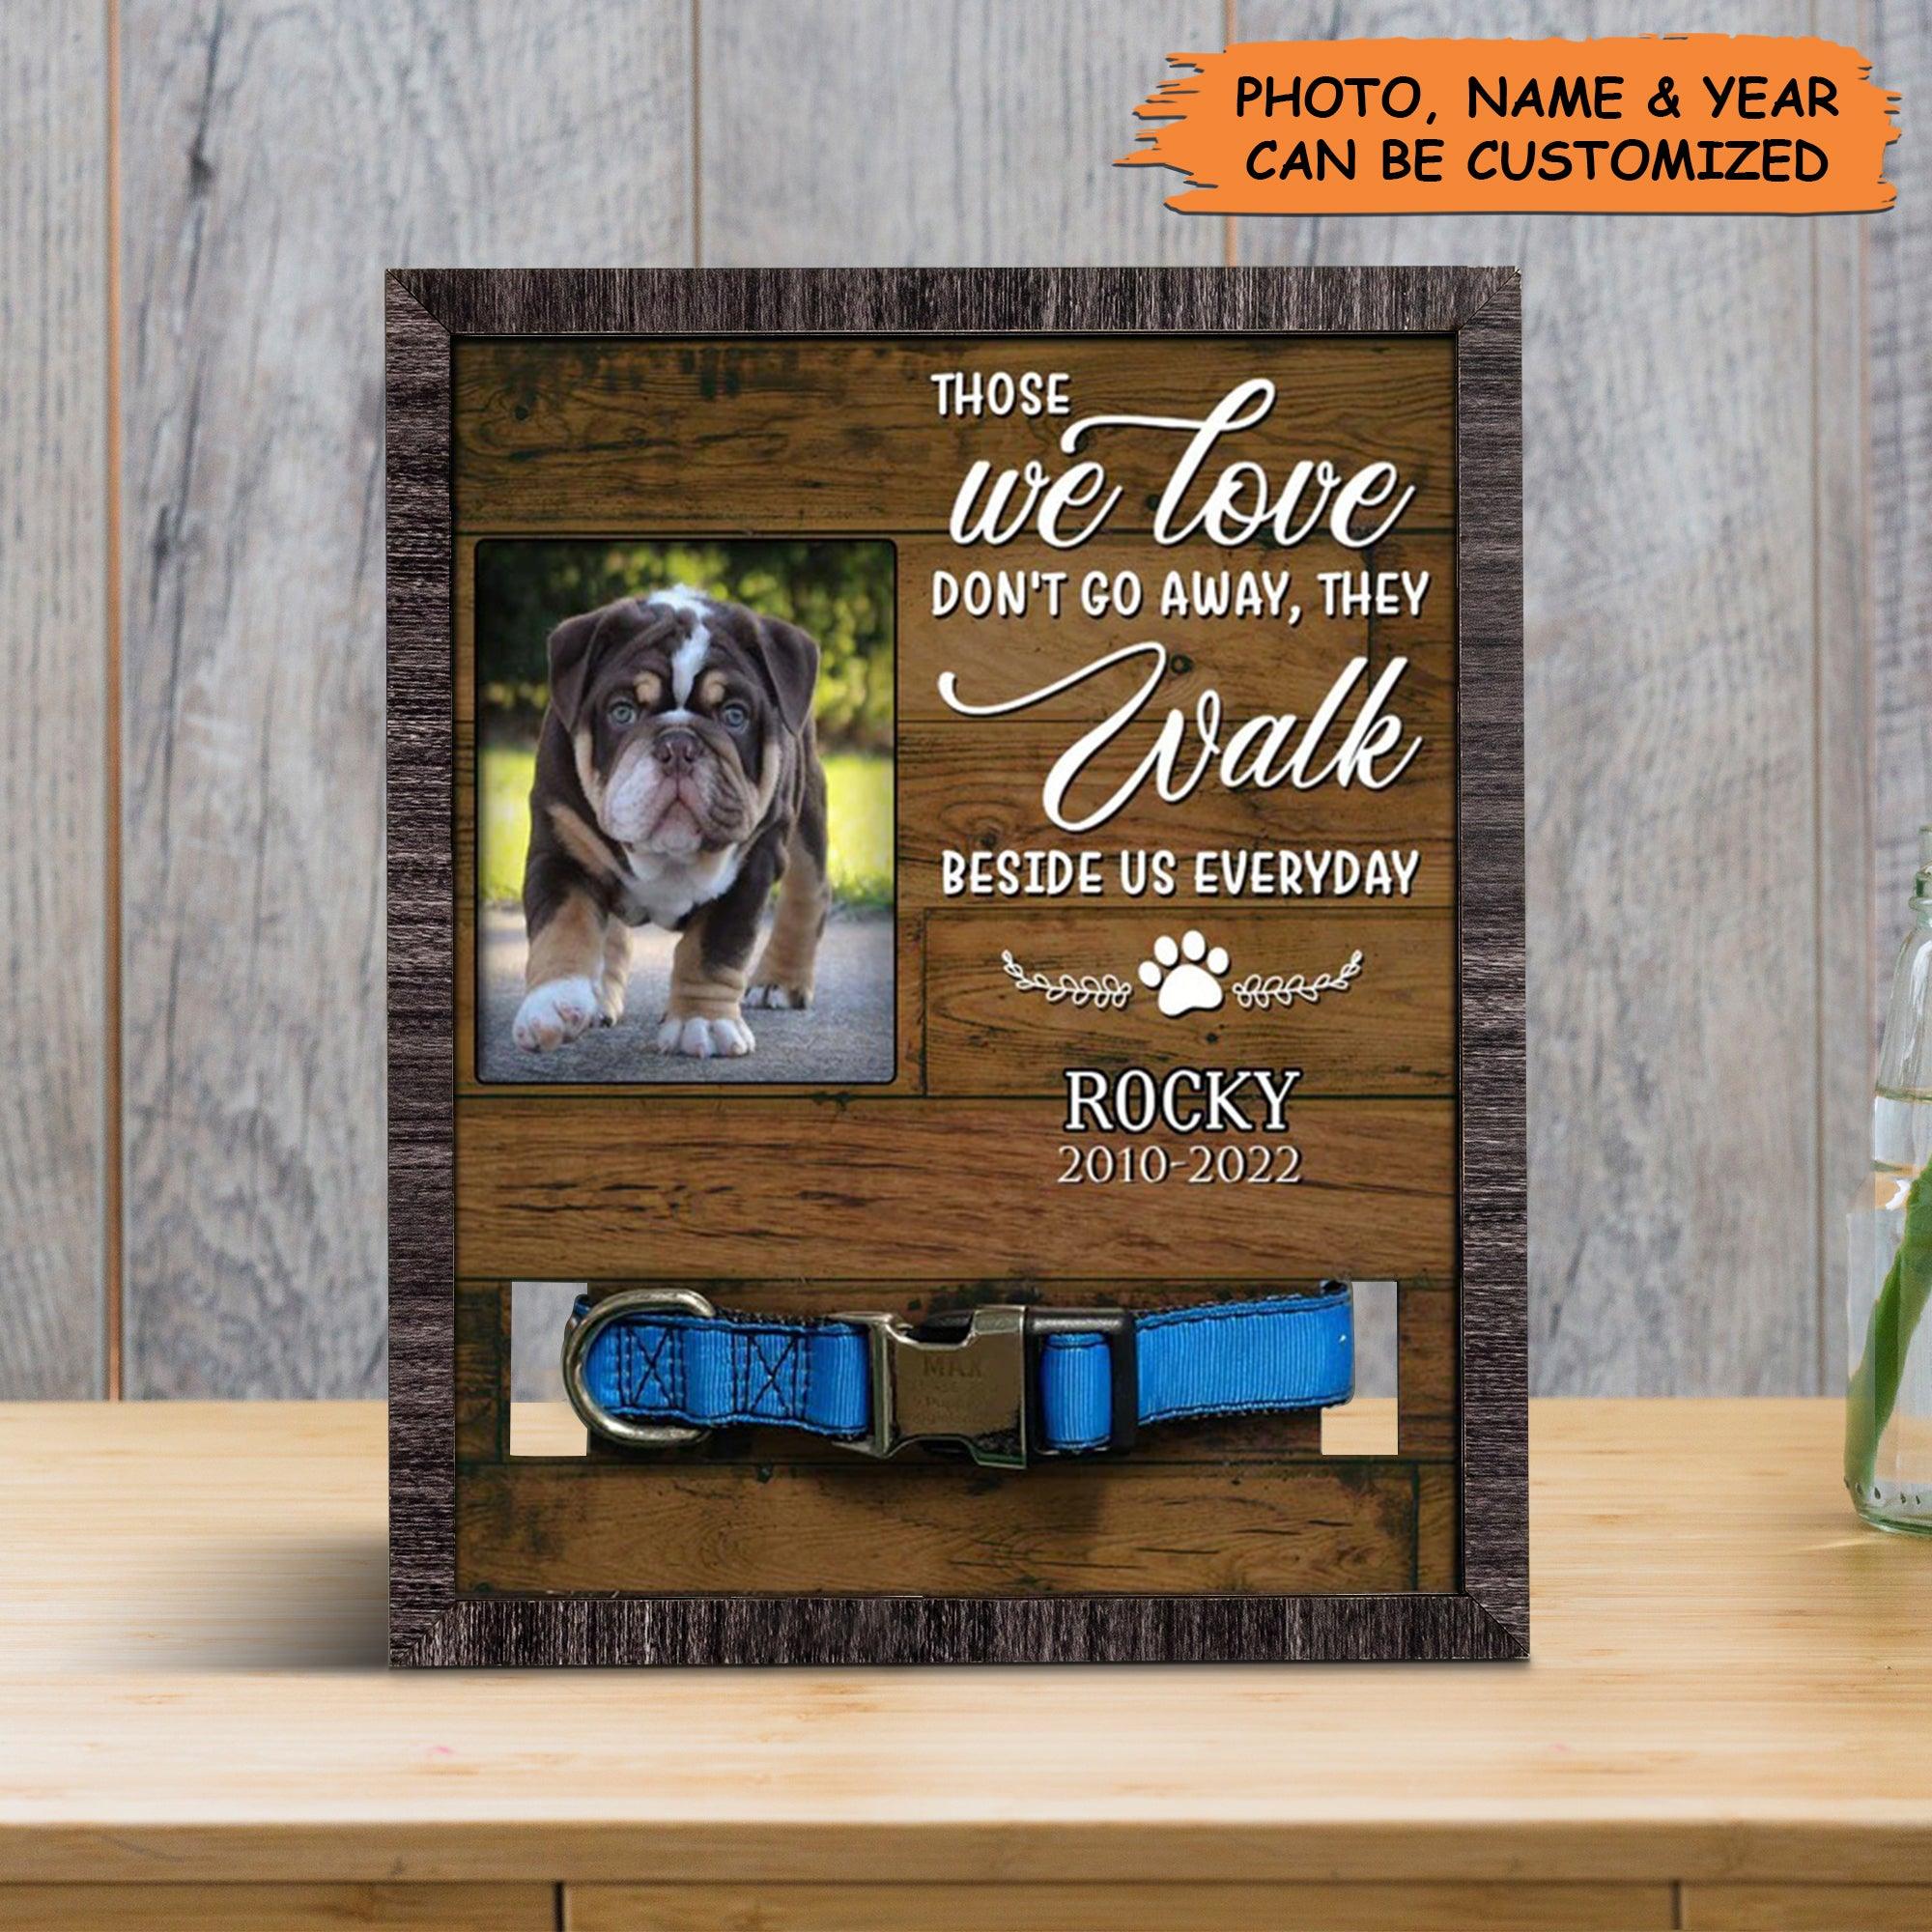 Personalized Pet Collar Frame - Picture Frame For Loss Of Bulldog, Dog Remembrance, Memorial Custom Collar Frame - Gift For Grieving Pet Owner - Amzanimalsgift